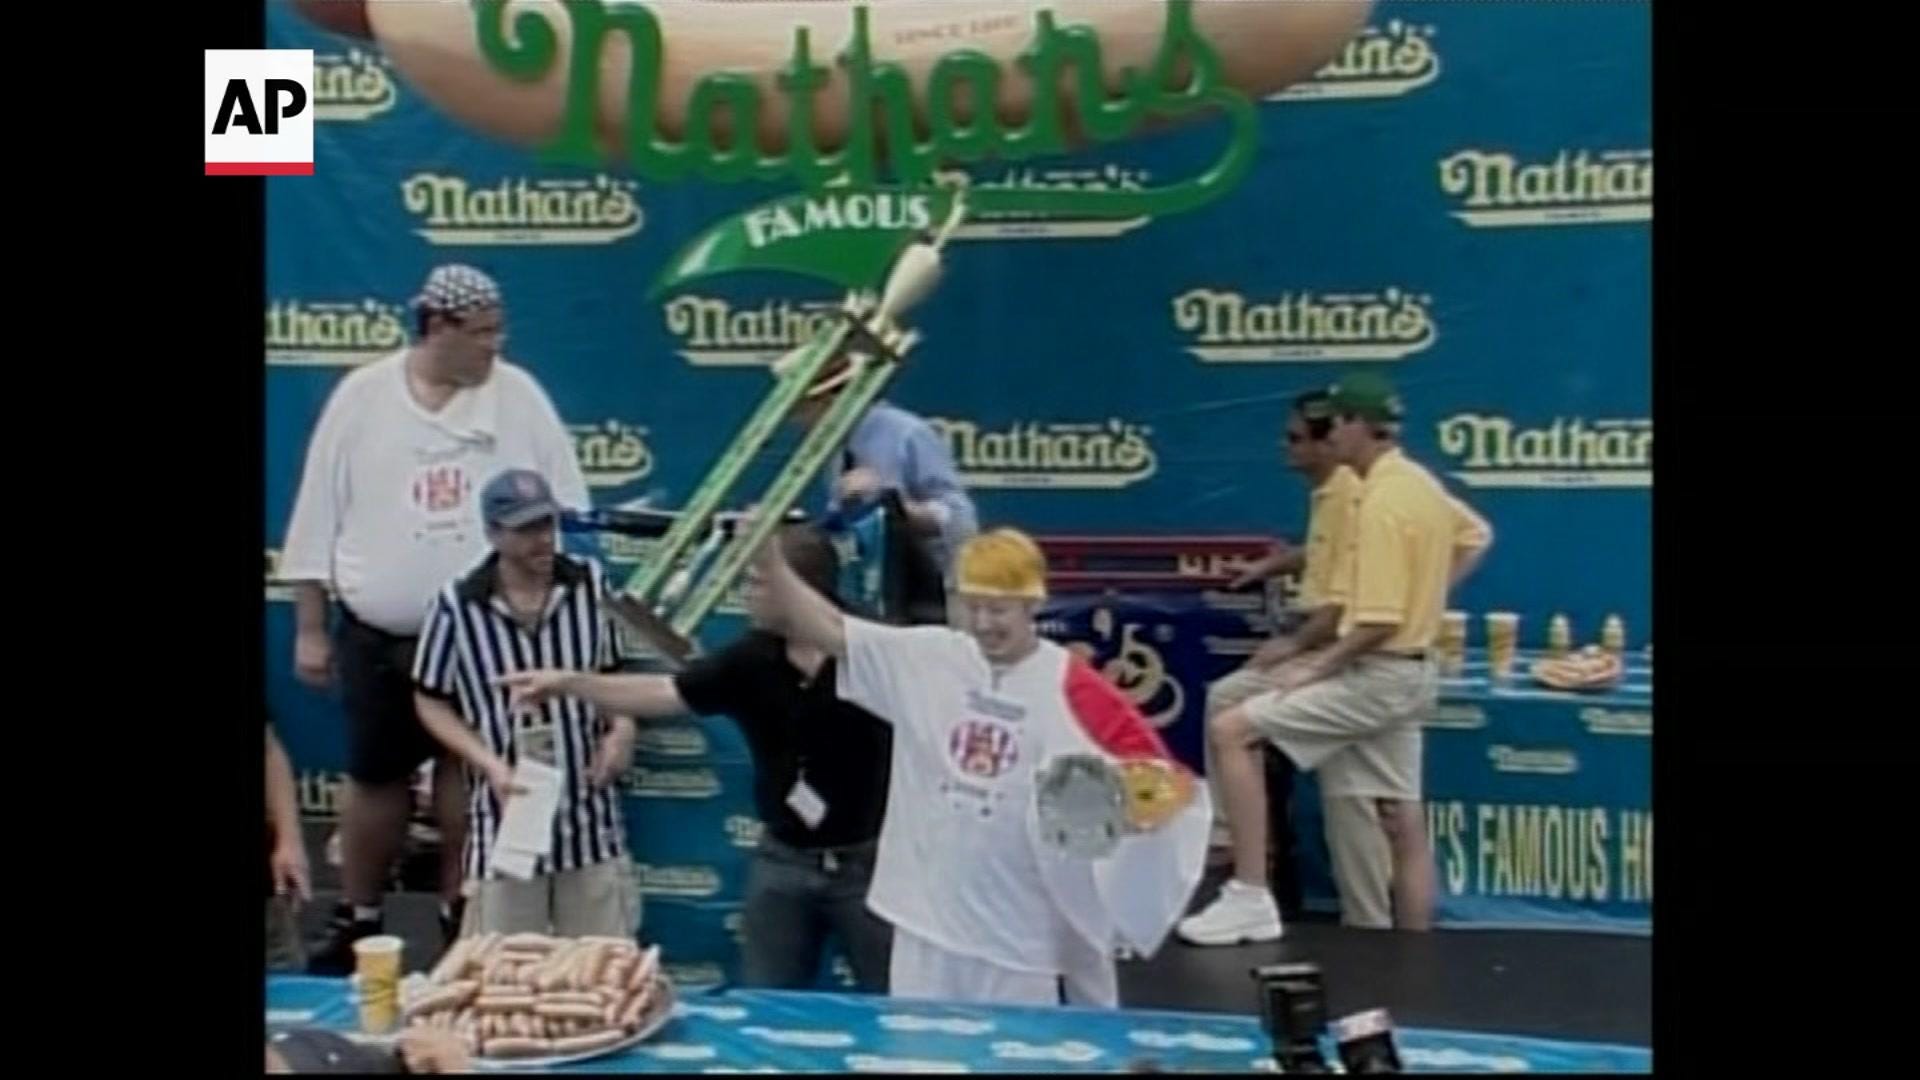 Takeru Kobayashi, Joey Chestnut's onetime rival, says he could win hot dog eating contest: 'I'm still the best' thumbnail